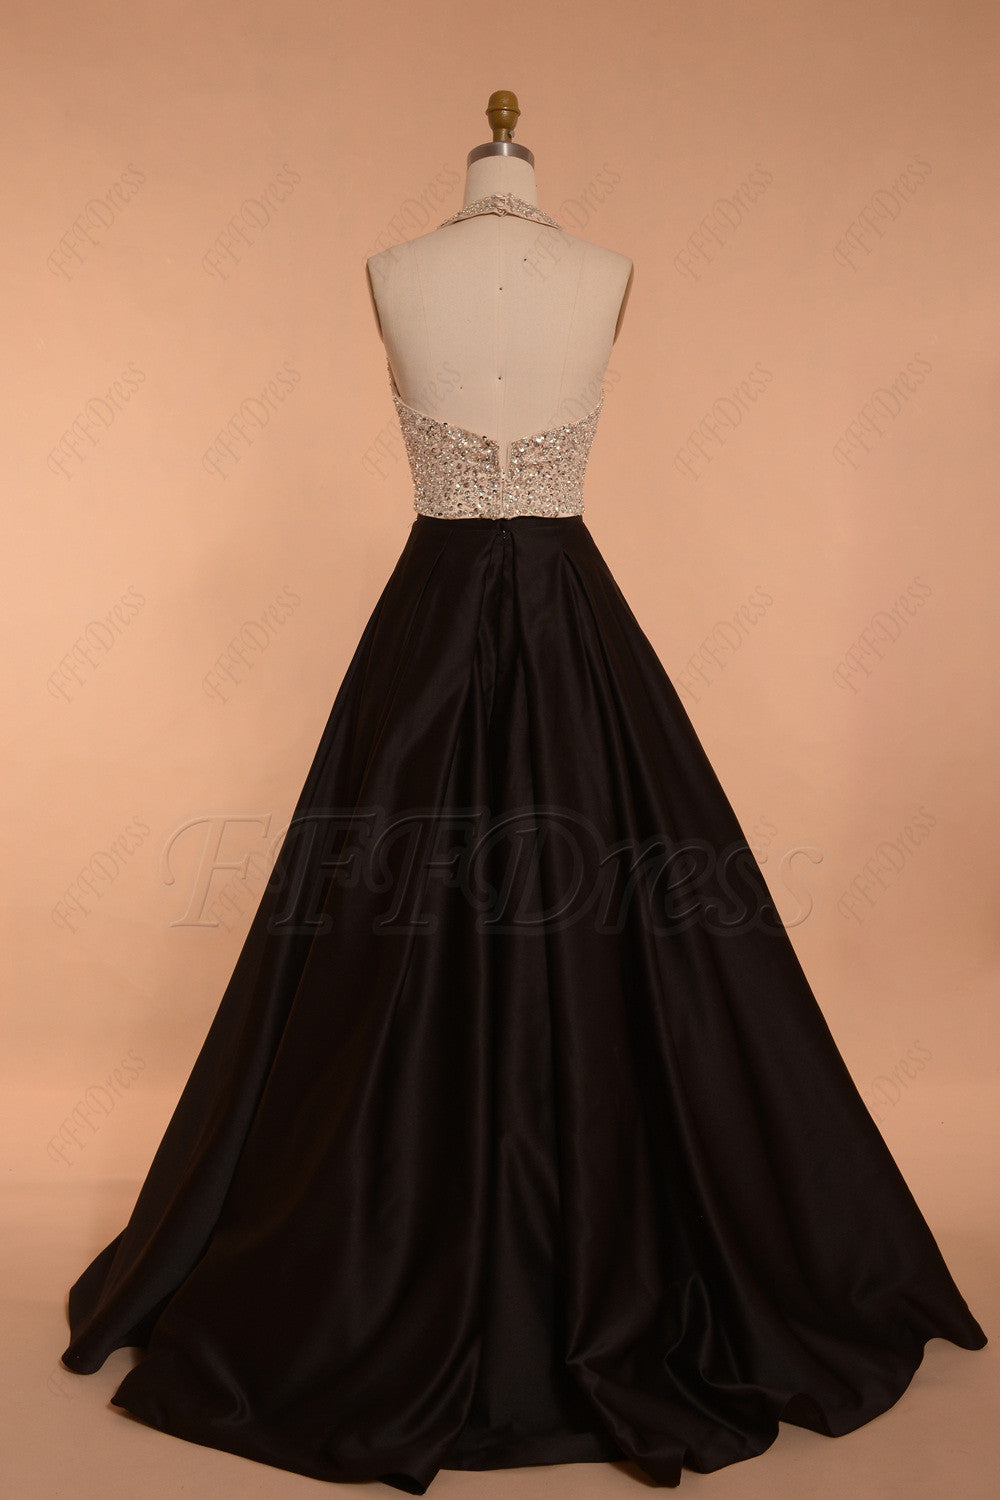 Halter backless beaded champagne black ball gown prom dresses